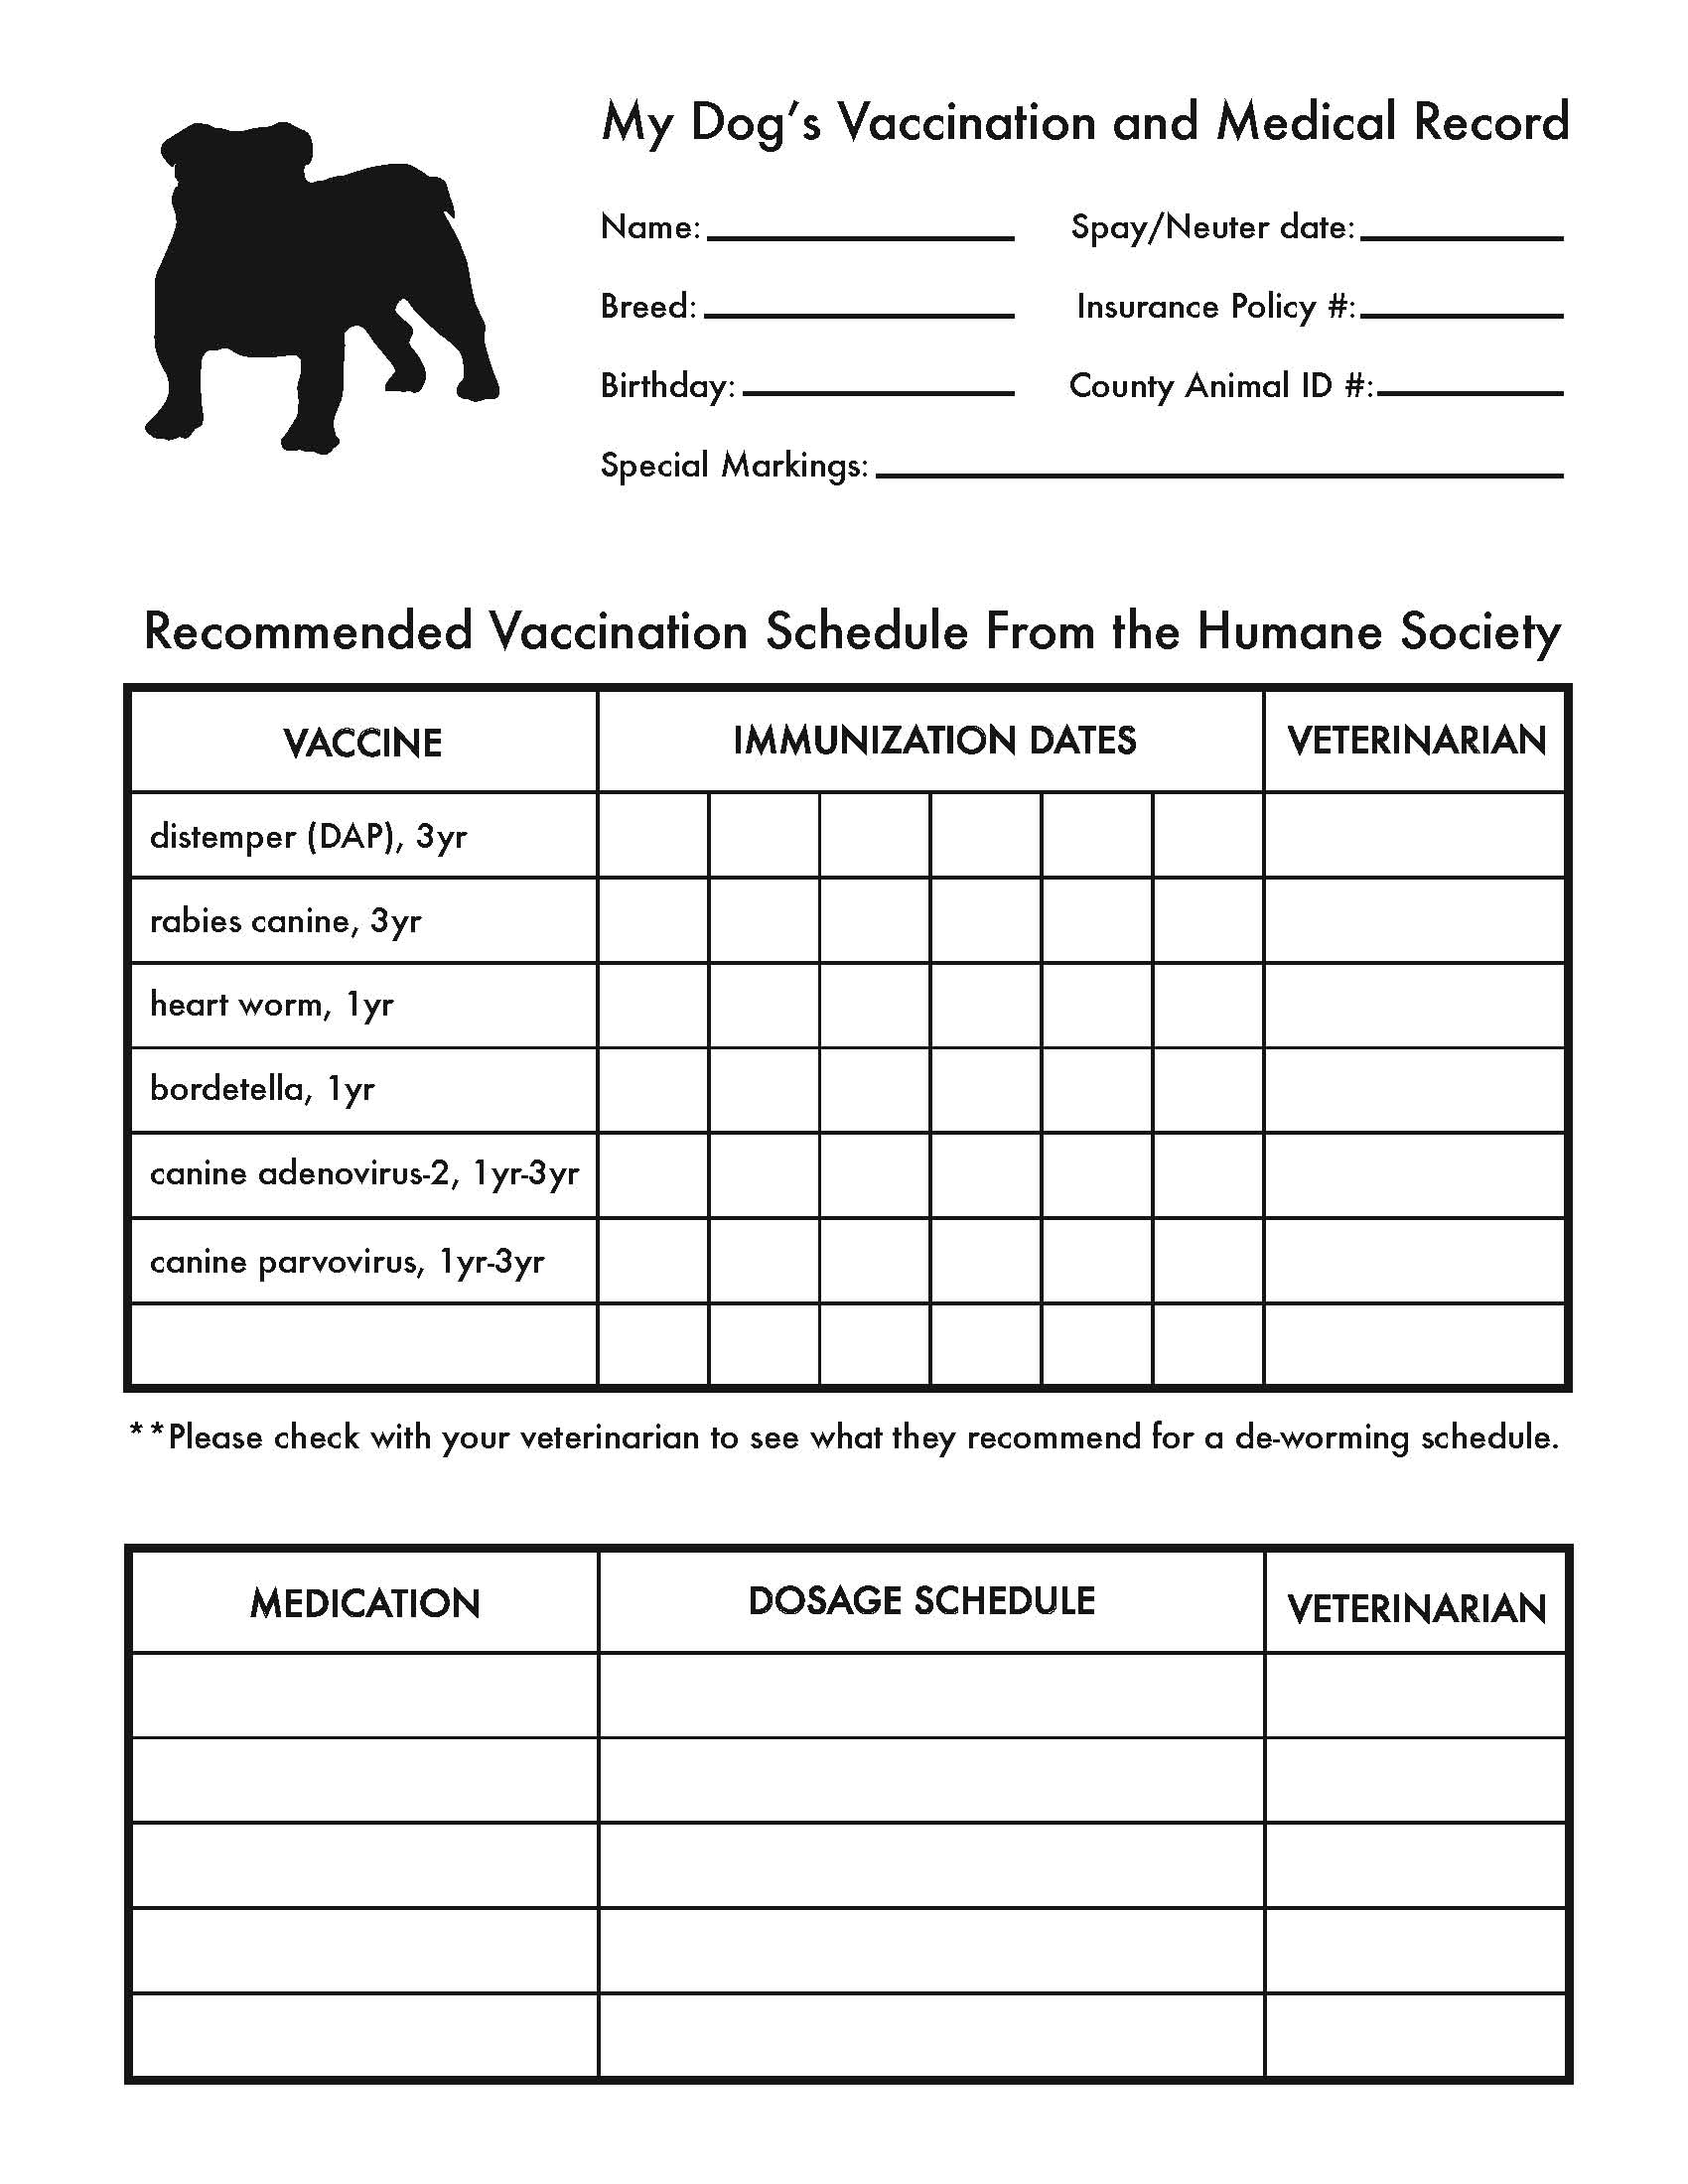 printable-vaccination-record-for-dogs